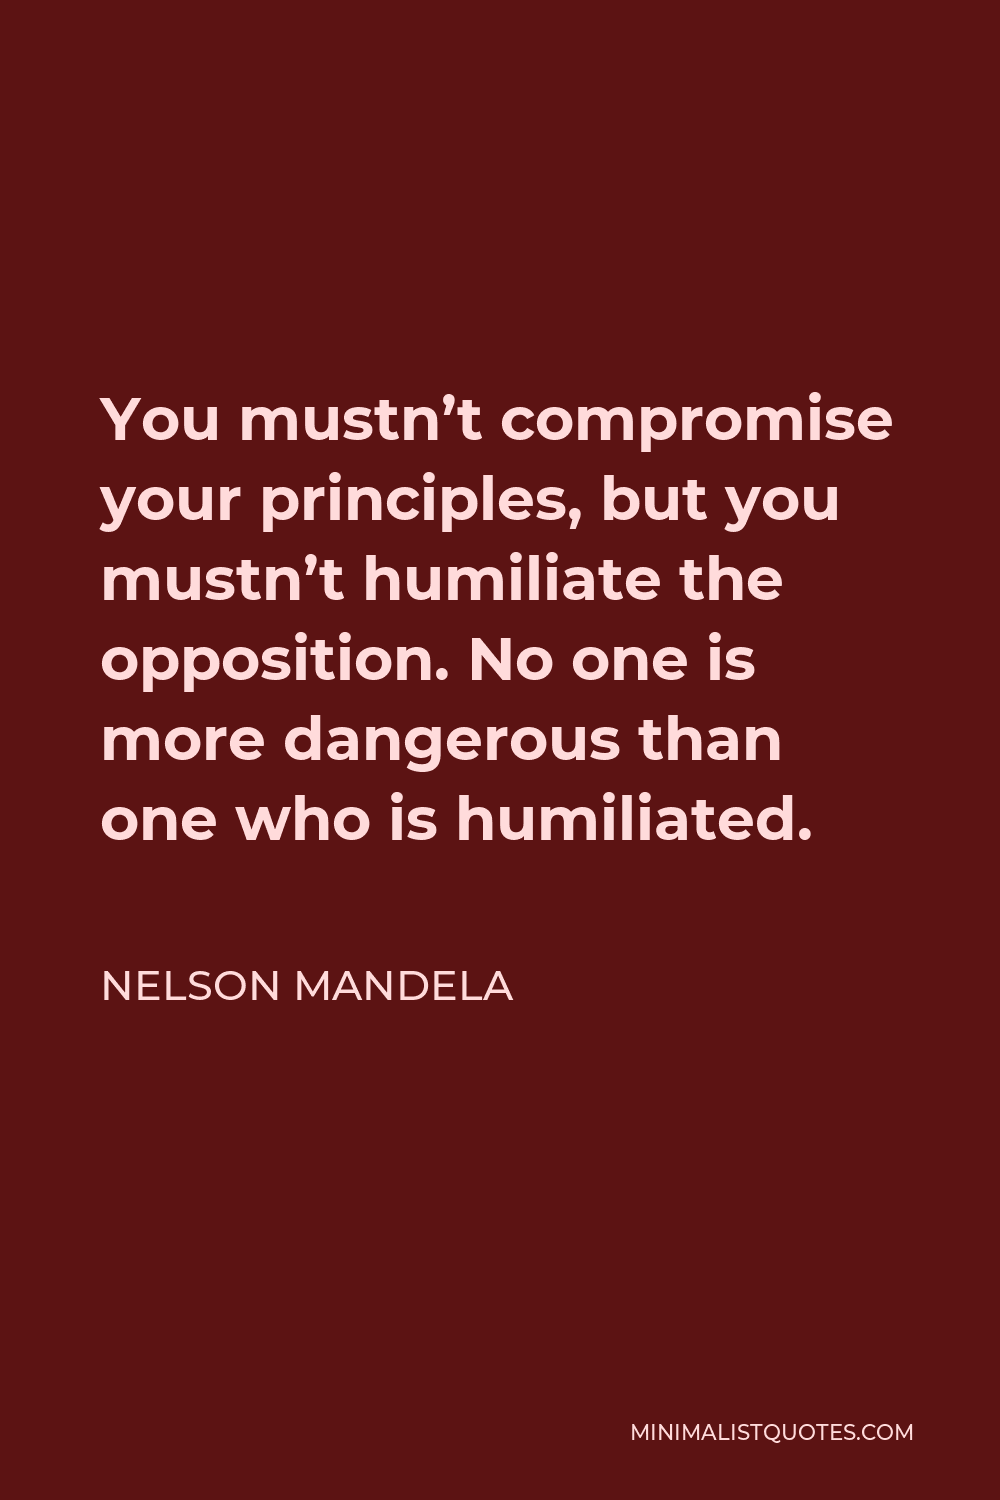 Nelson Mandela Quote - You mustn’t compromise your principles, but you mustn’t humiliate the opposition. No one is more dangerous than one who is humiliated.